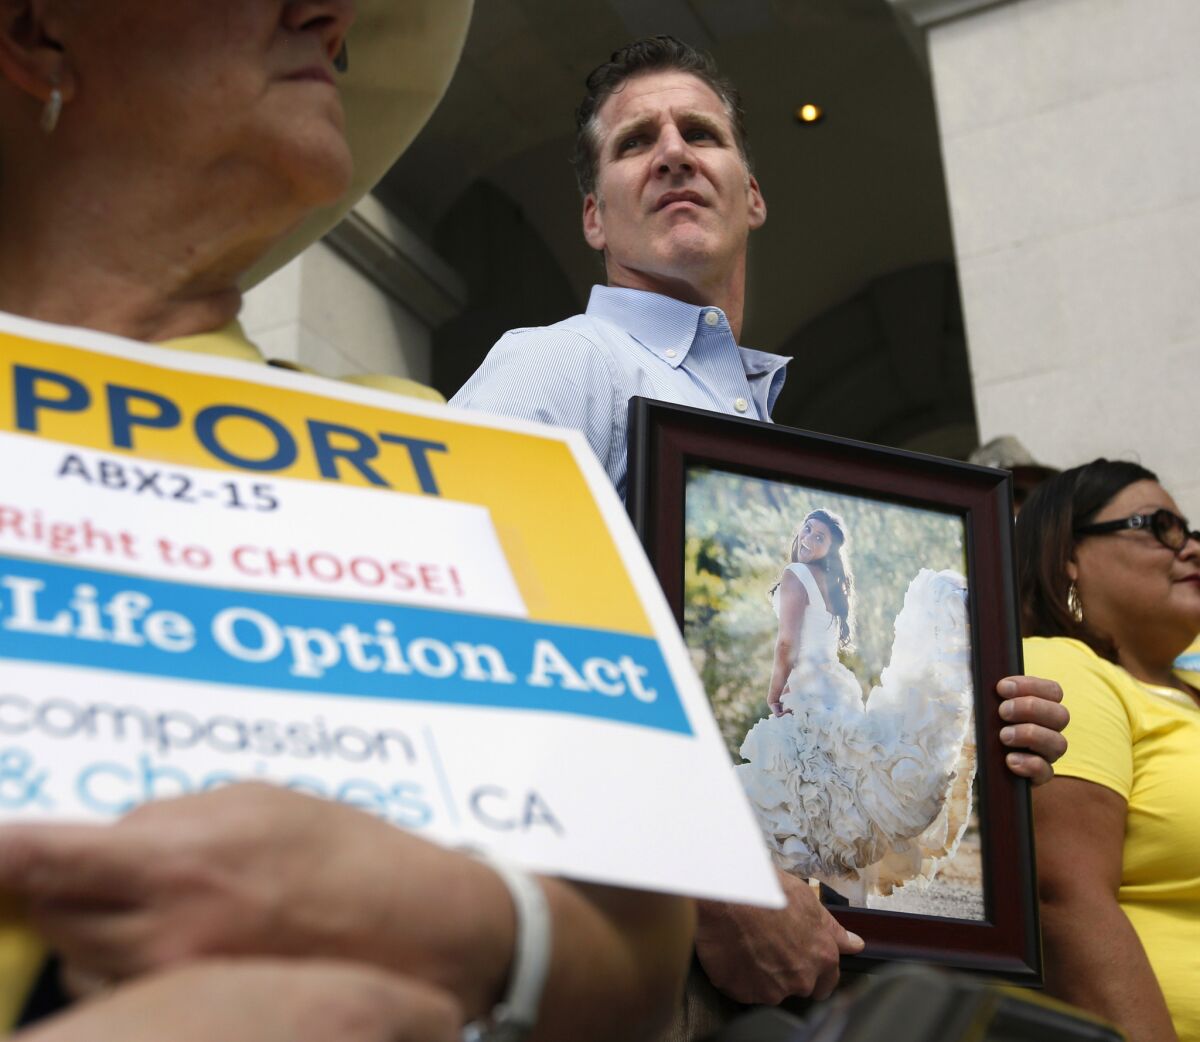 Dan Diaz holds a photo of his late wife, Brittany Maynard, during a rally in September in favor of the End of Life Option Act in Sacramento. A majority of California voters support the measure, according to a new poll. Gov. Jerry Brown signed it into law on Monday.